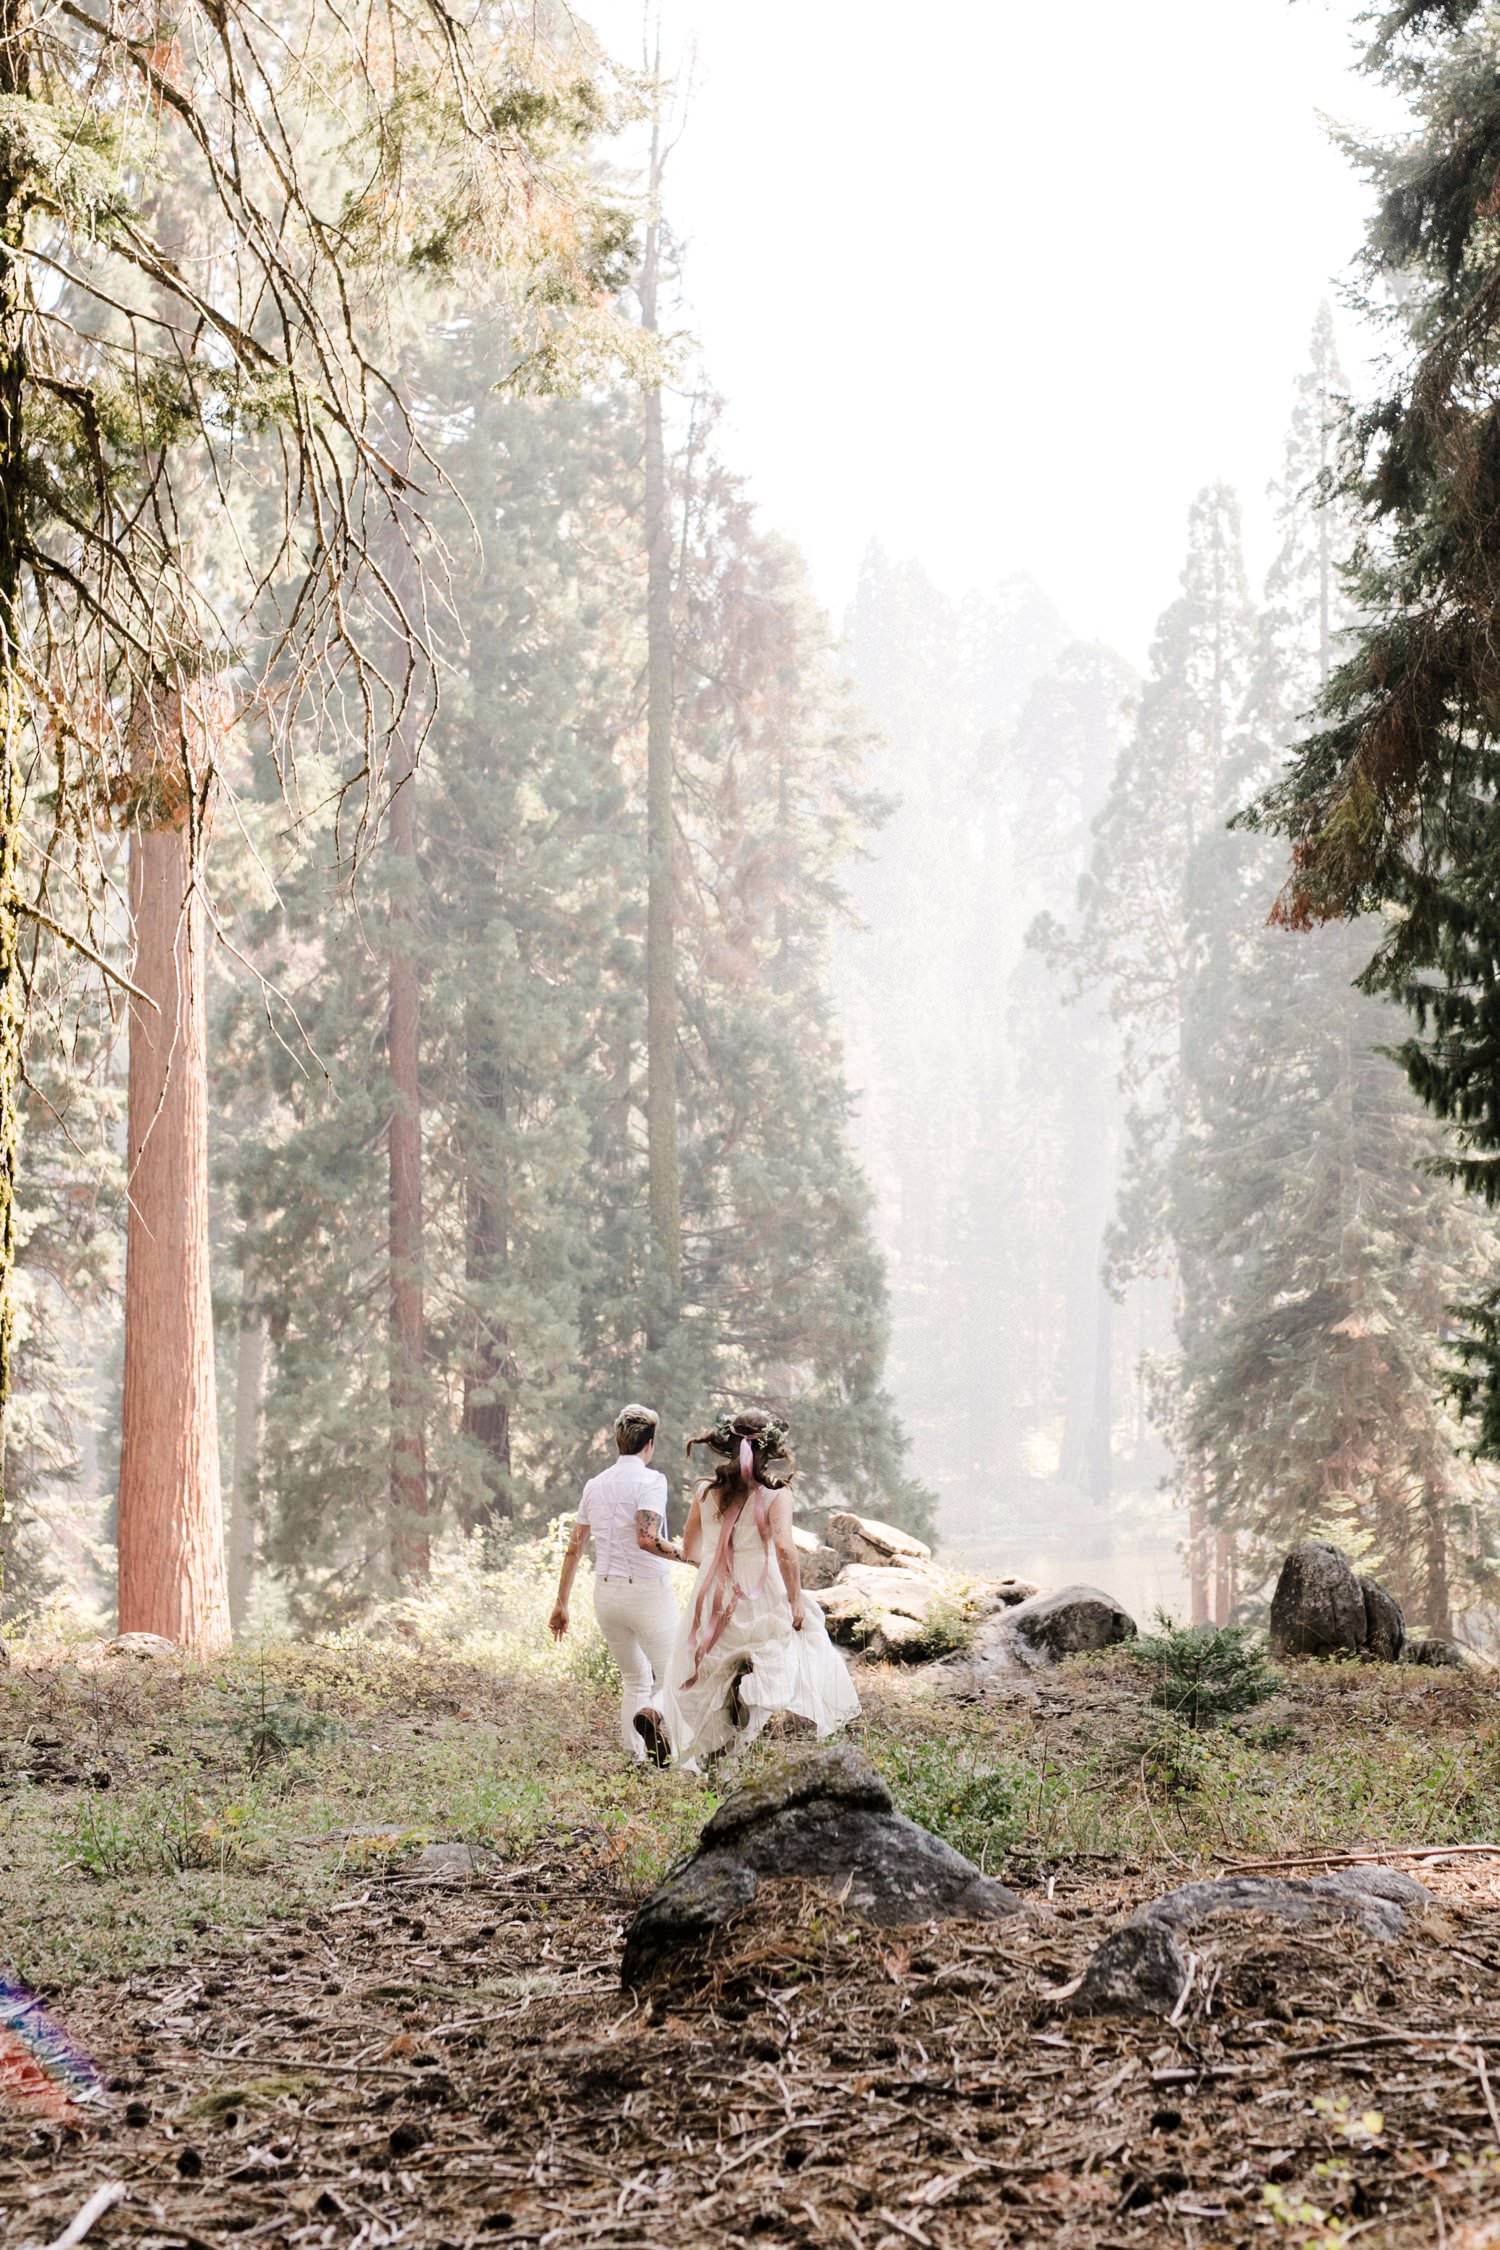 Sequoia National Forest camp wedding photographer